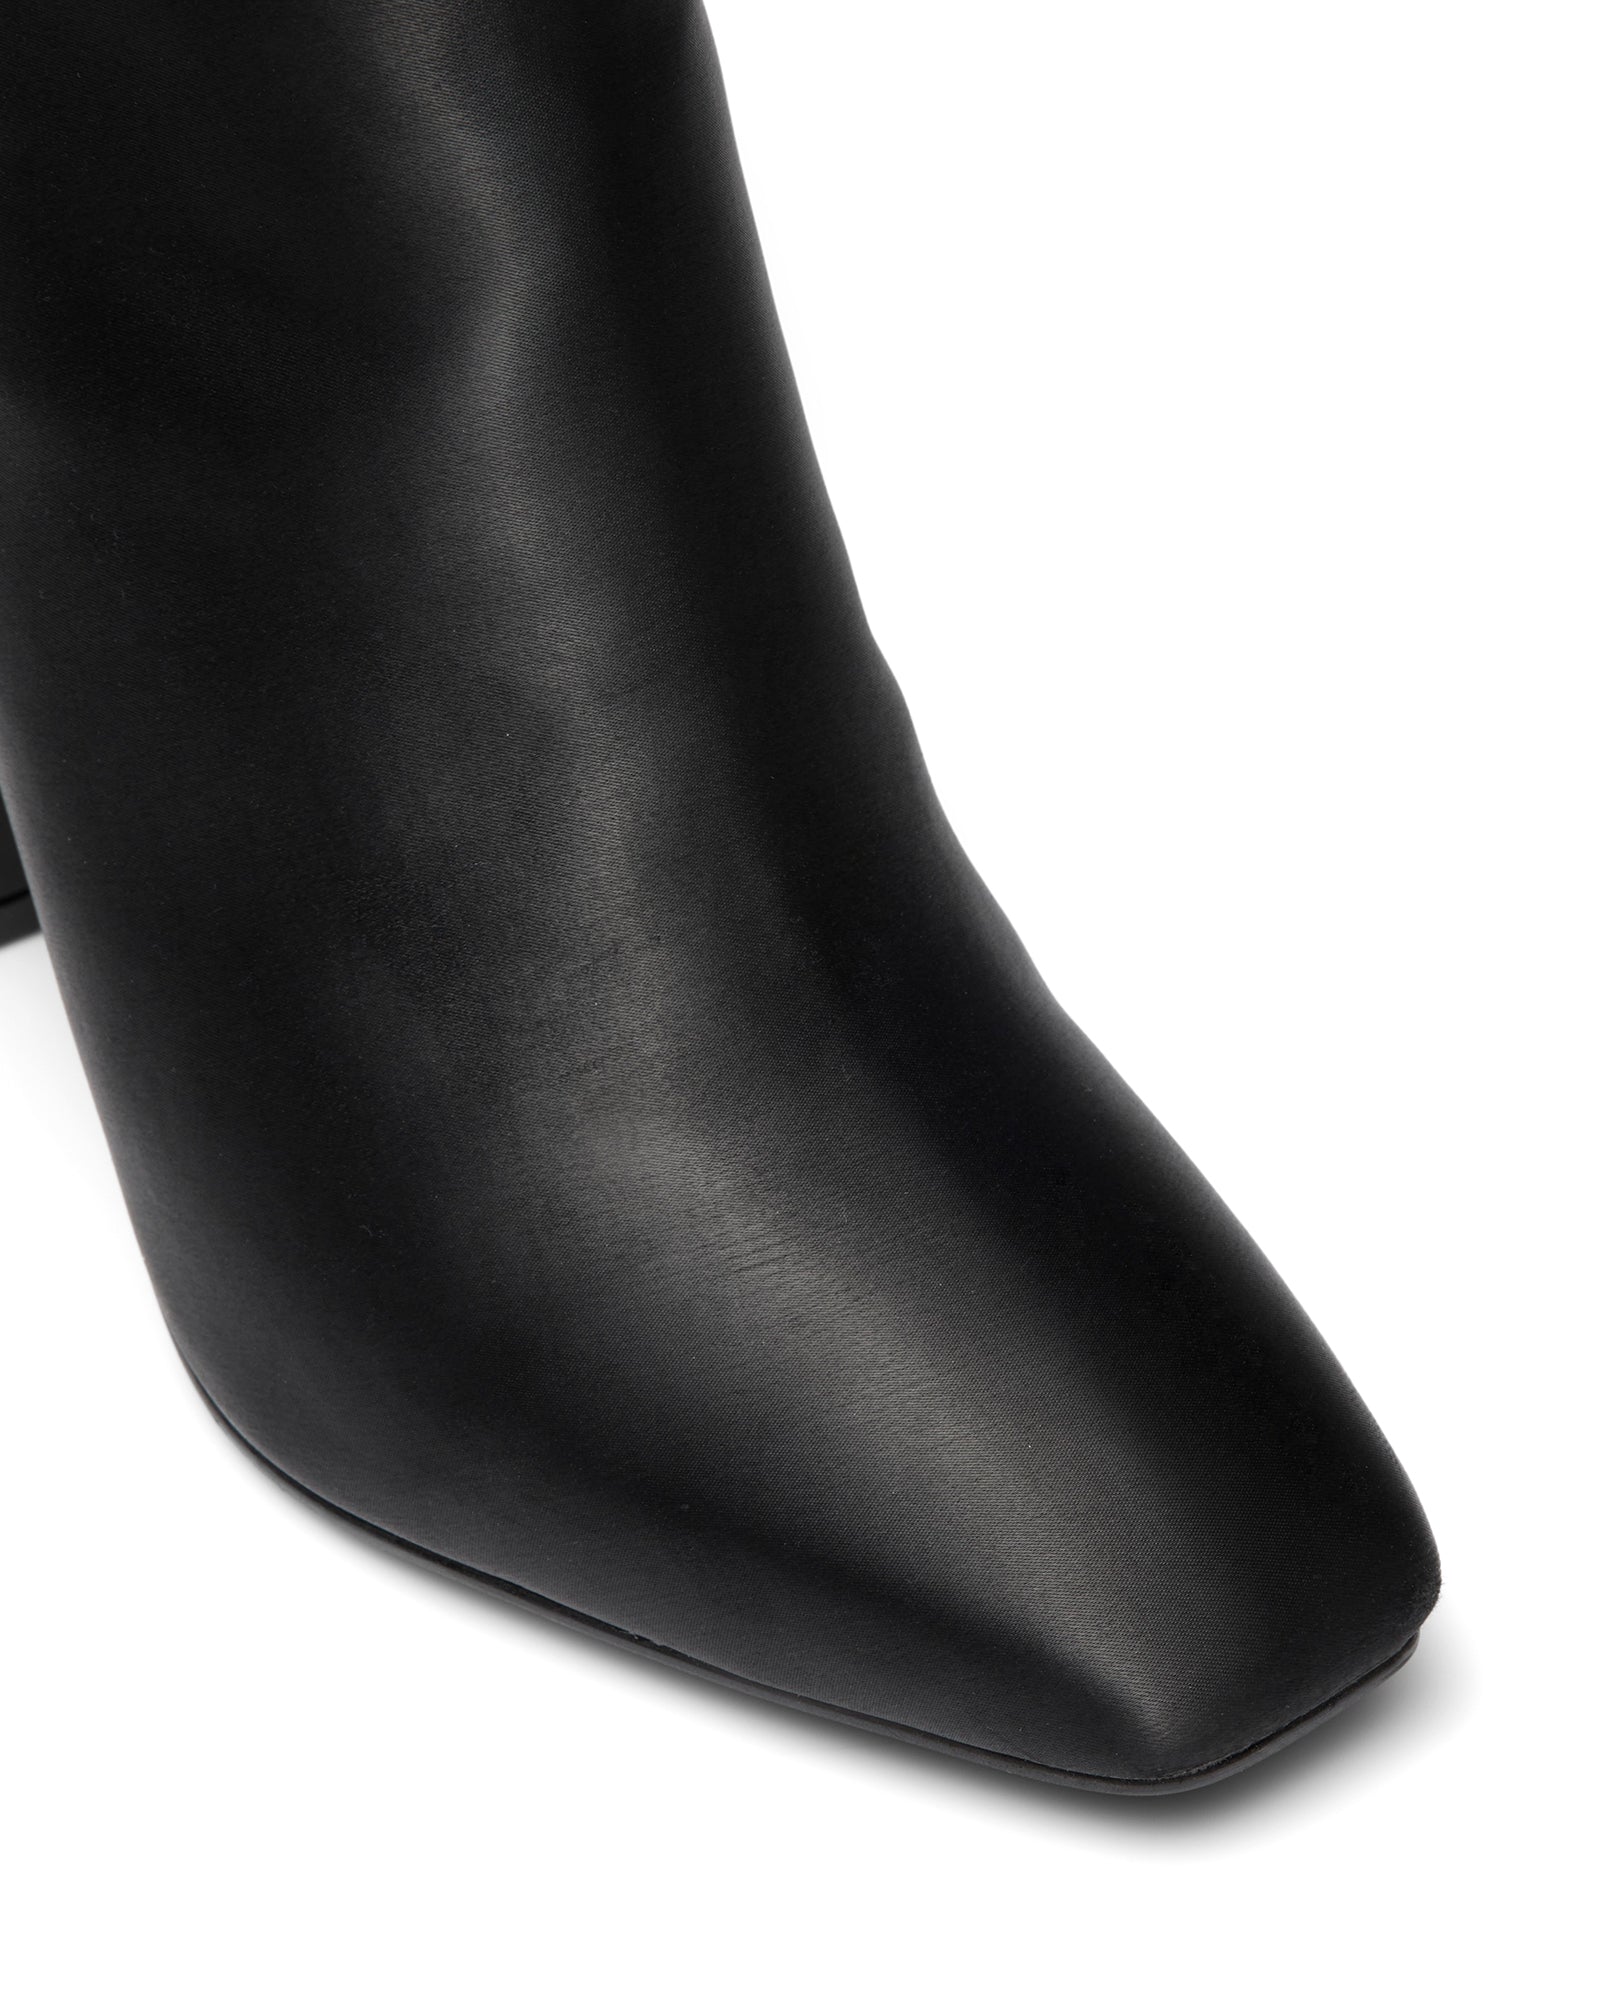 Therapy Shoes Muse Black Satin | Women's Boots | Knee High | Tall | 90's